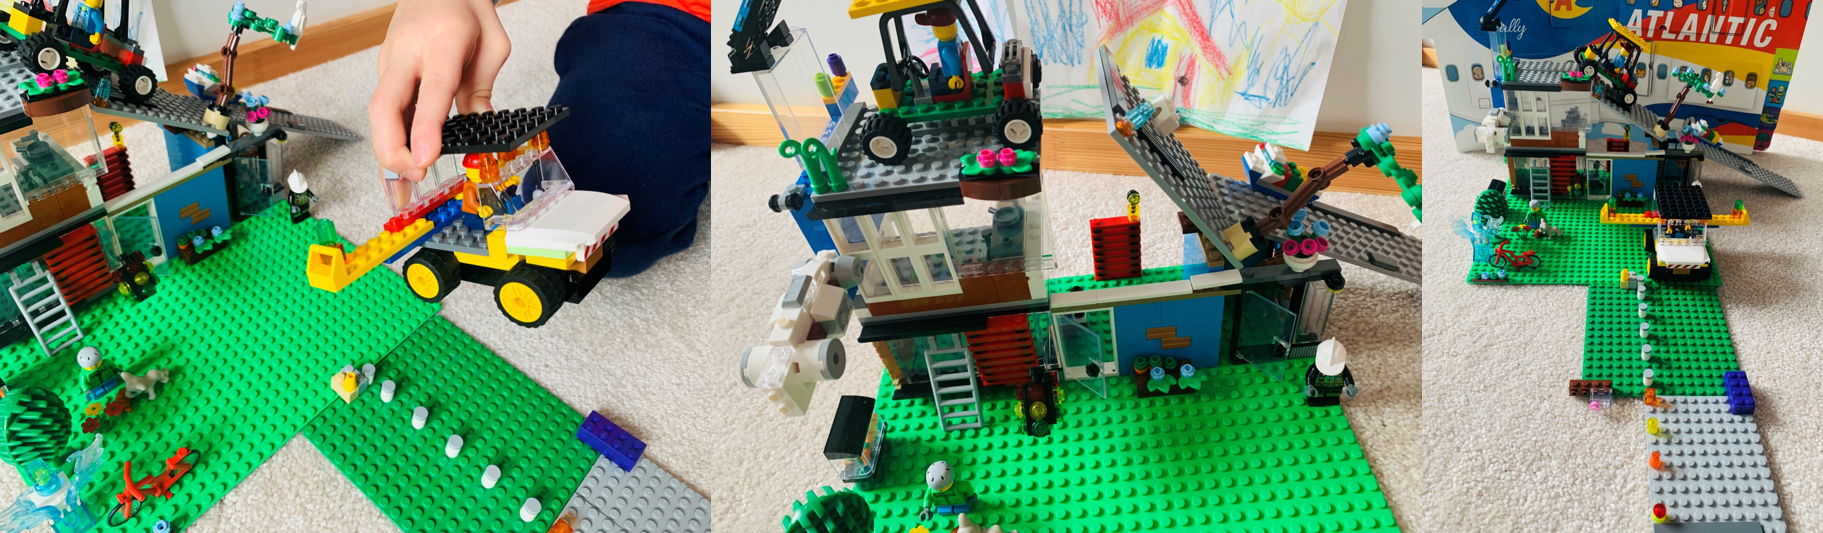 A collage of images depicting a child's LEGO® creation